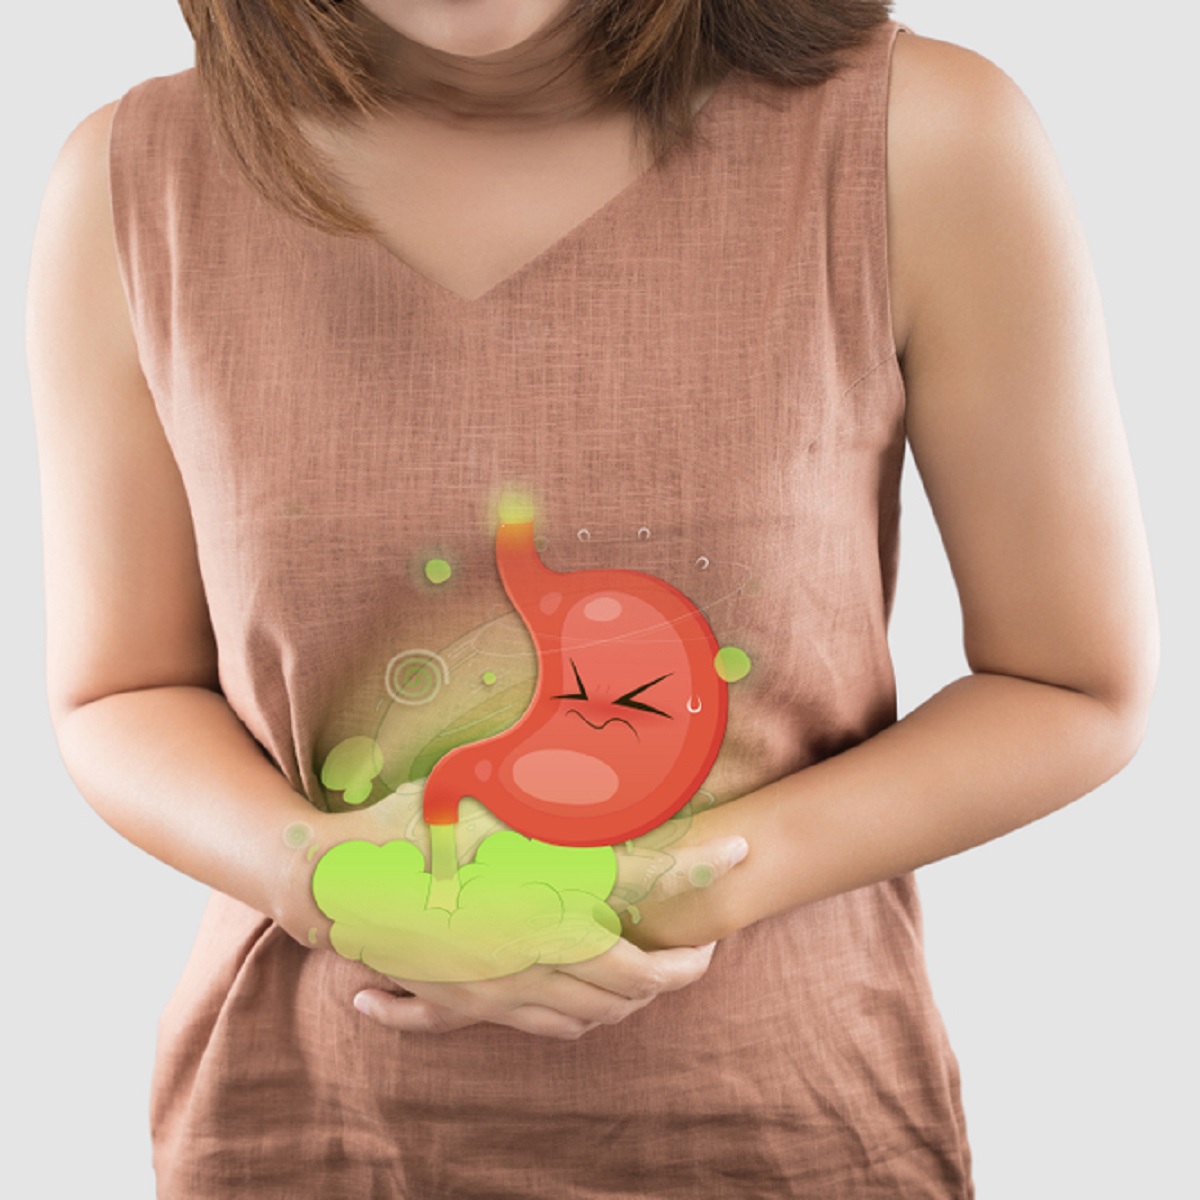 Read more about the article IRRITABLE BOWEL SYNDROME (IBS) – Symptoms, Causes, Risk Groups, IBS Treatment, and IBS Diet